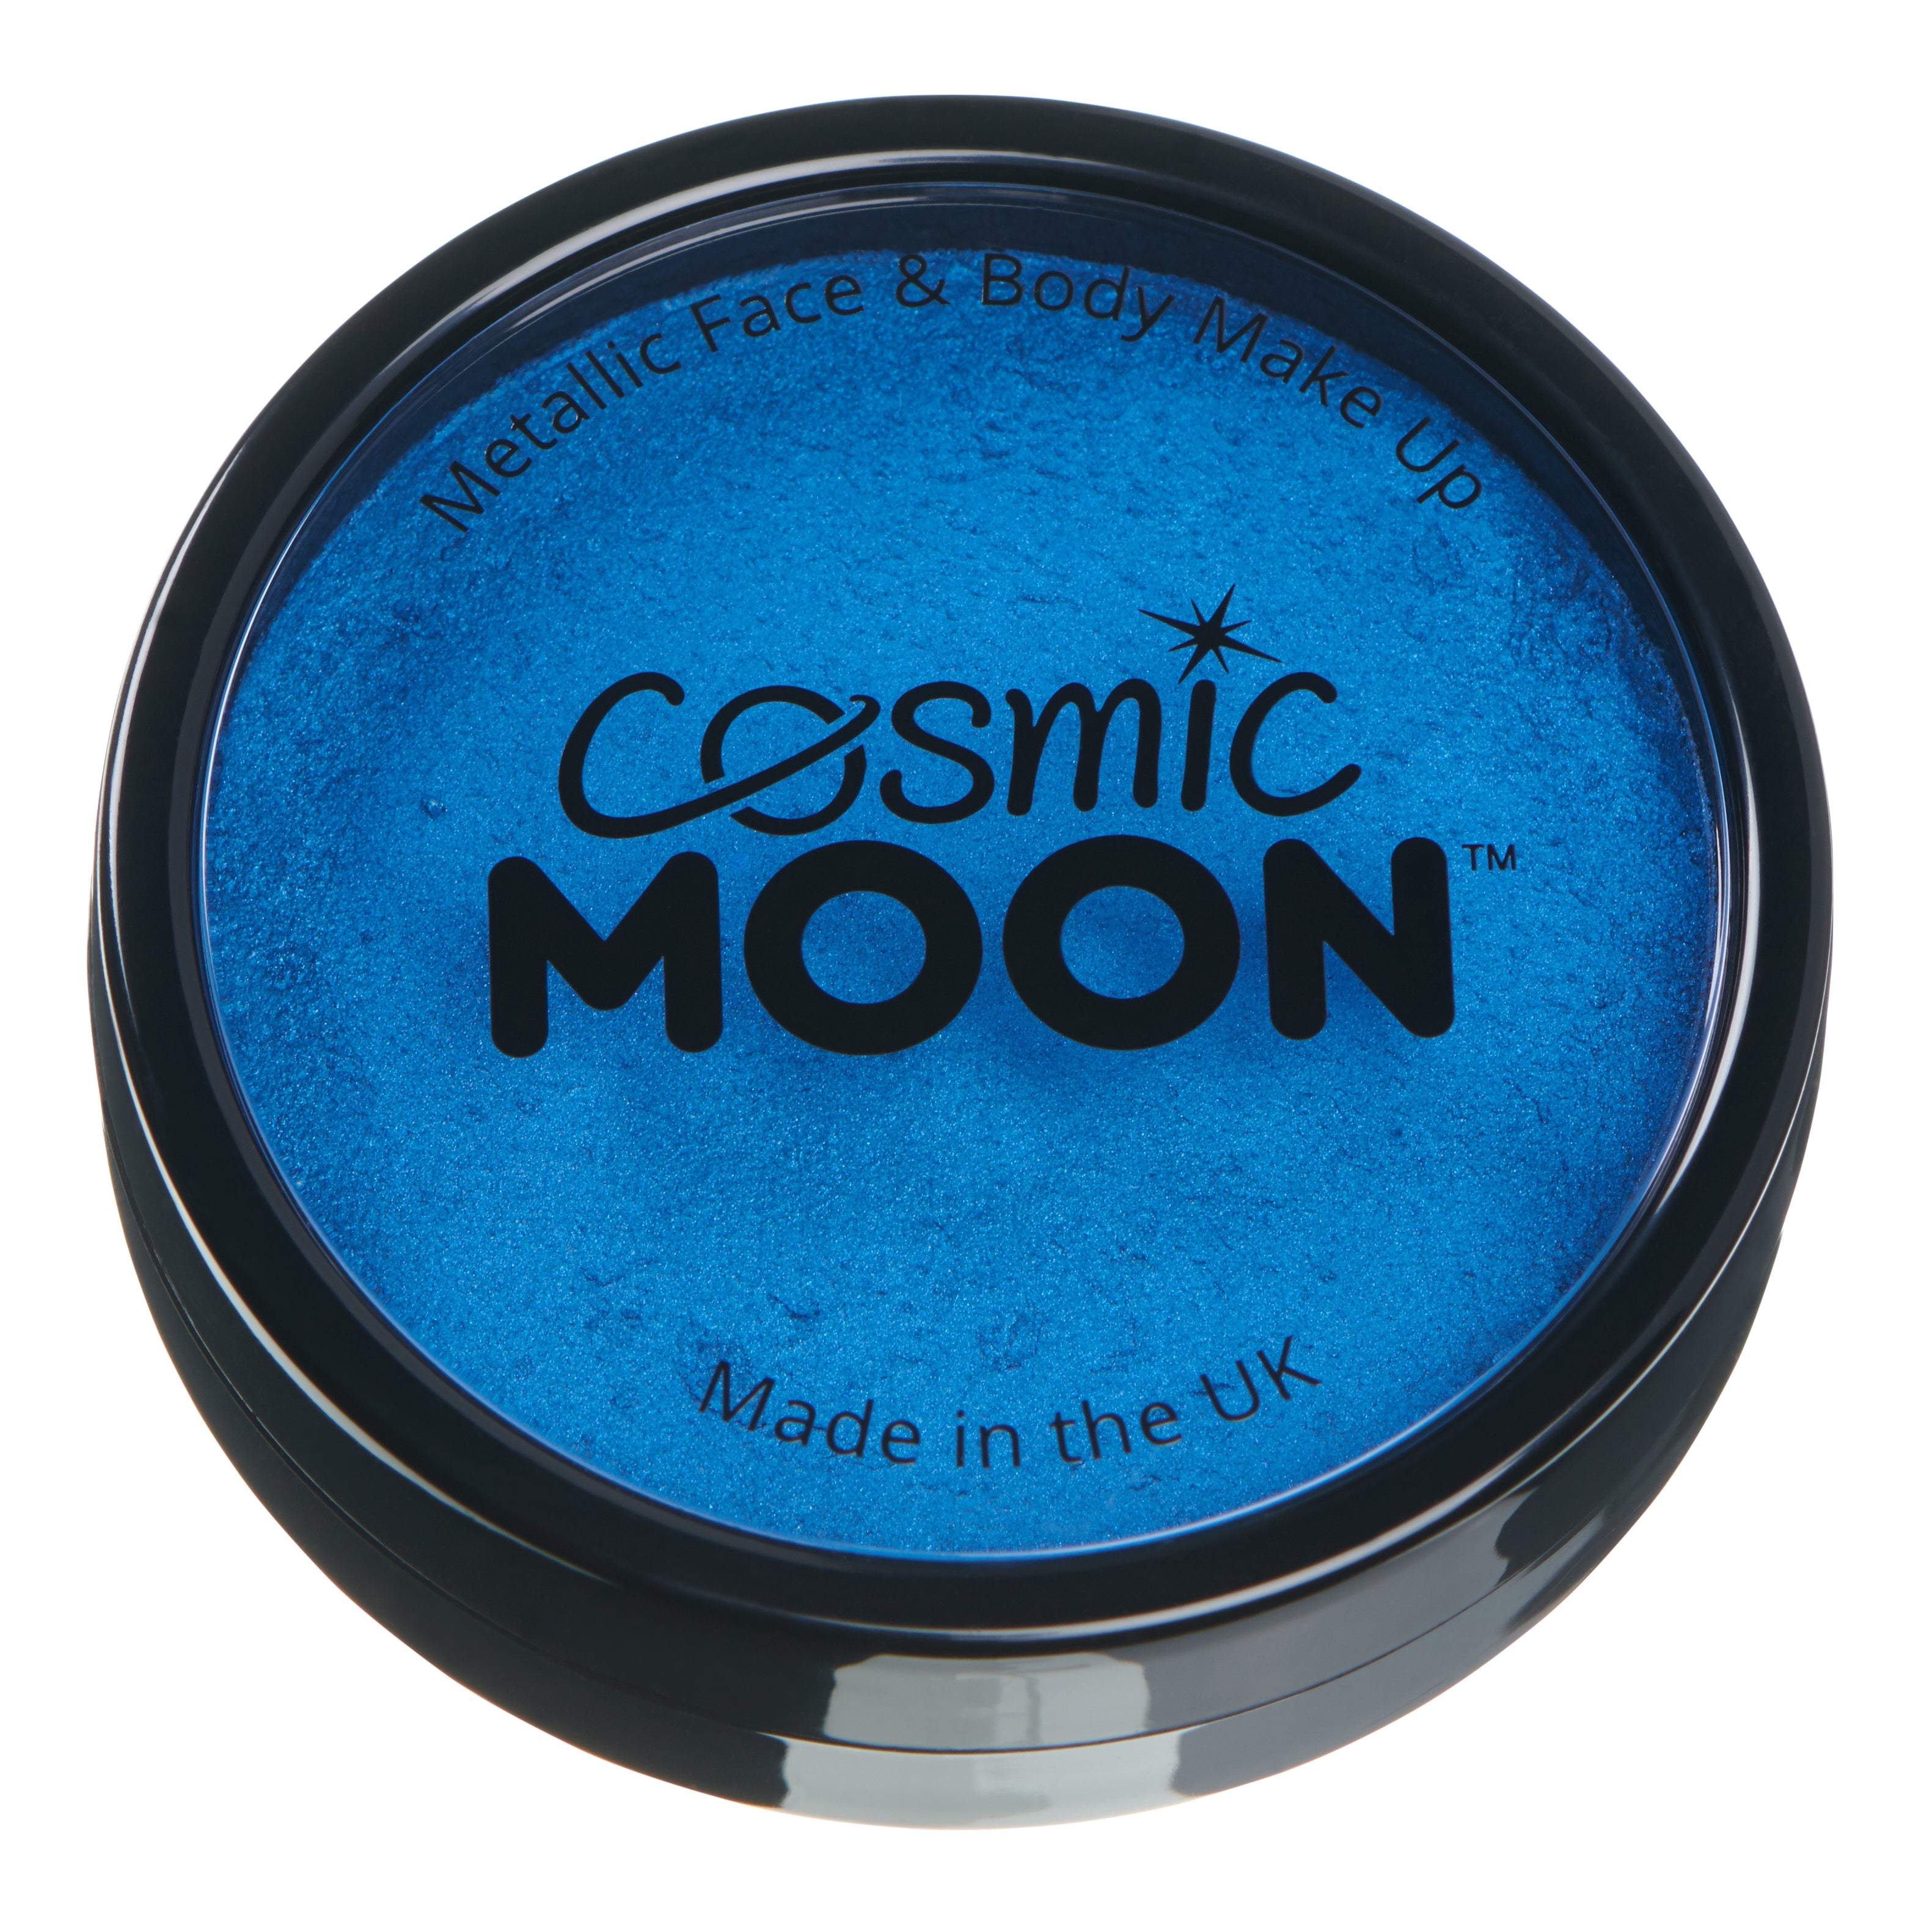 Blue - Metallic Professional Face Paint, 36g. Cosmetically certified, FDA & Health Canada compliant, cruelty free and vegan.